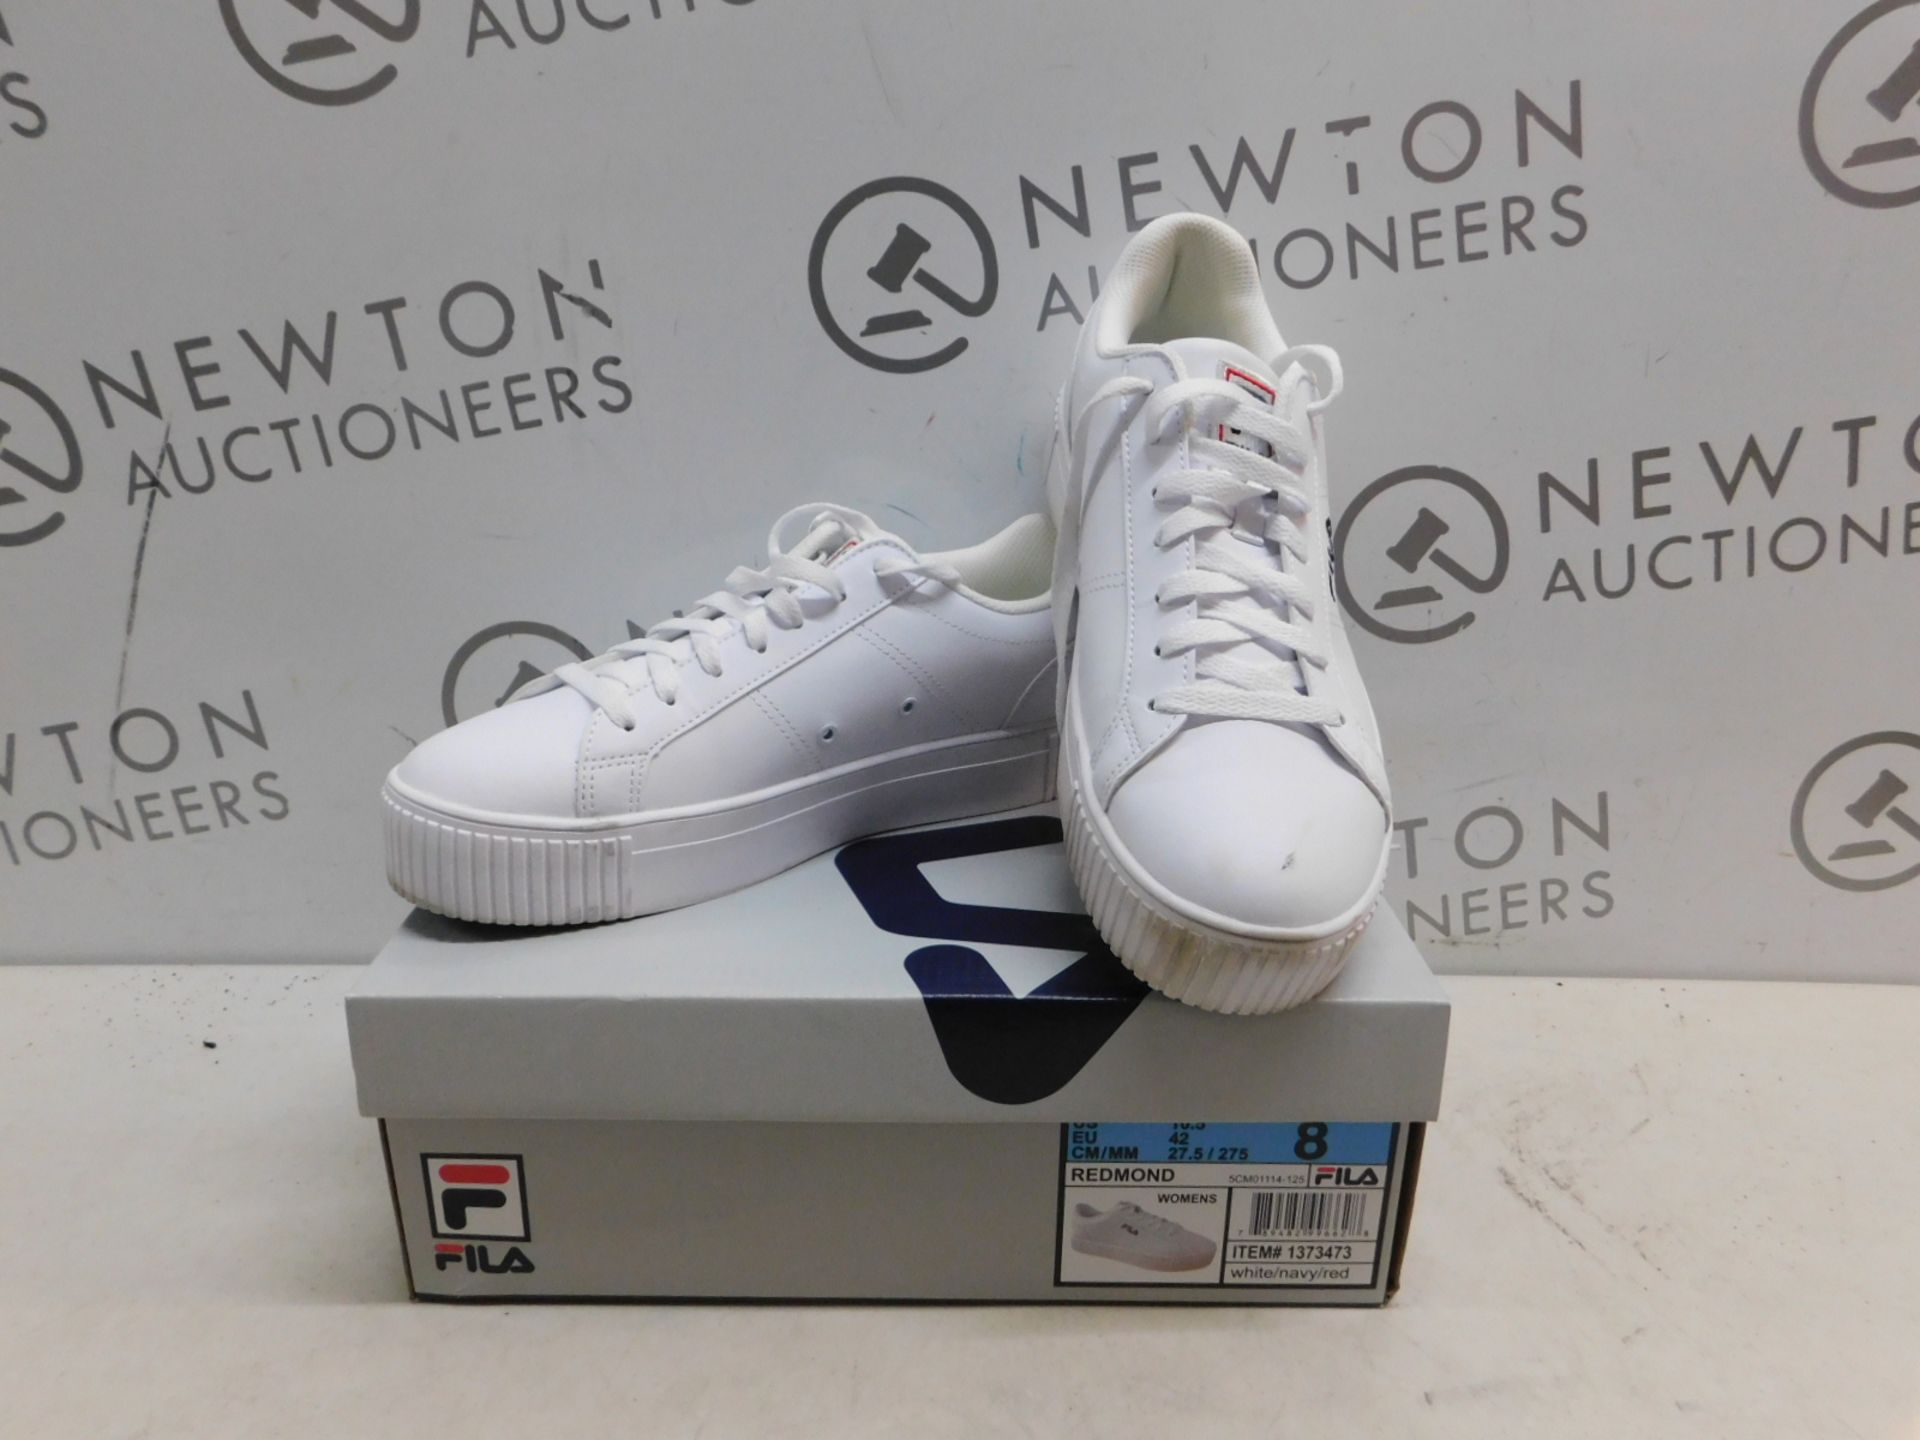 1 BOXED PAIR OF WOMENS FILA REDMOND TRAINERS UK SIZE 8 RRP Â£39